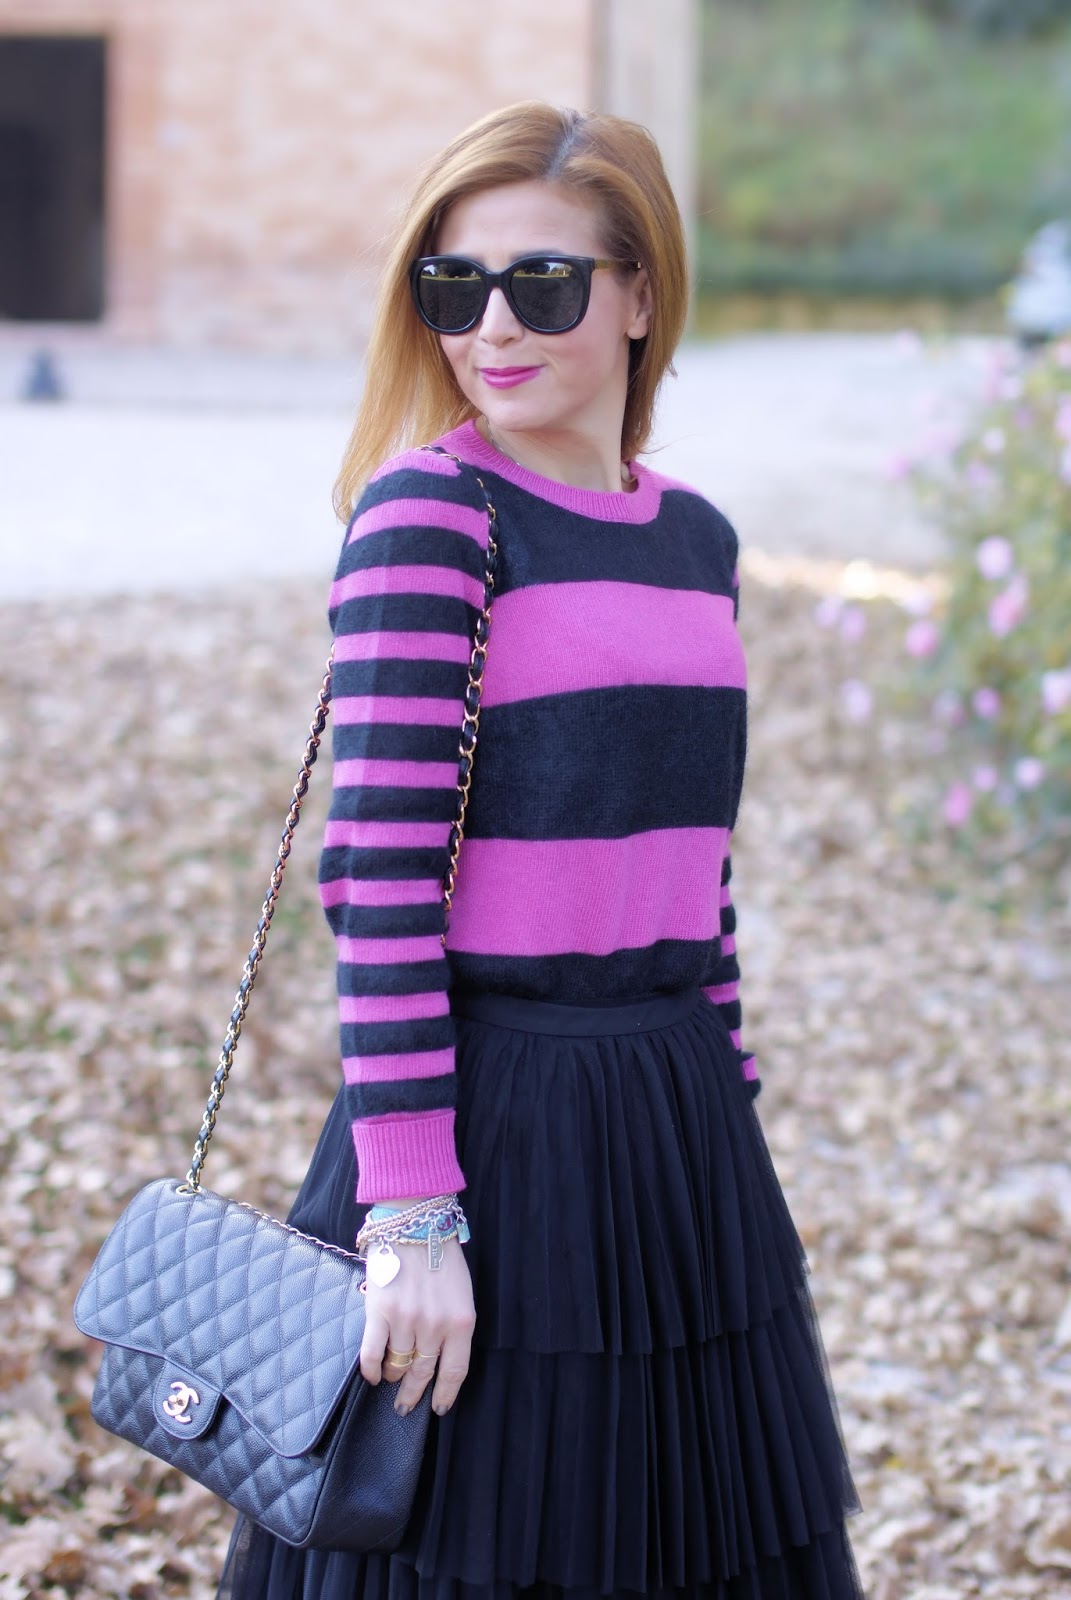 How to wear a black ruffle tulle skirt on Fashion and Cookies fashion blog, fashion blogger style